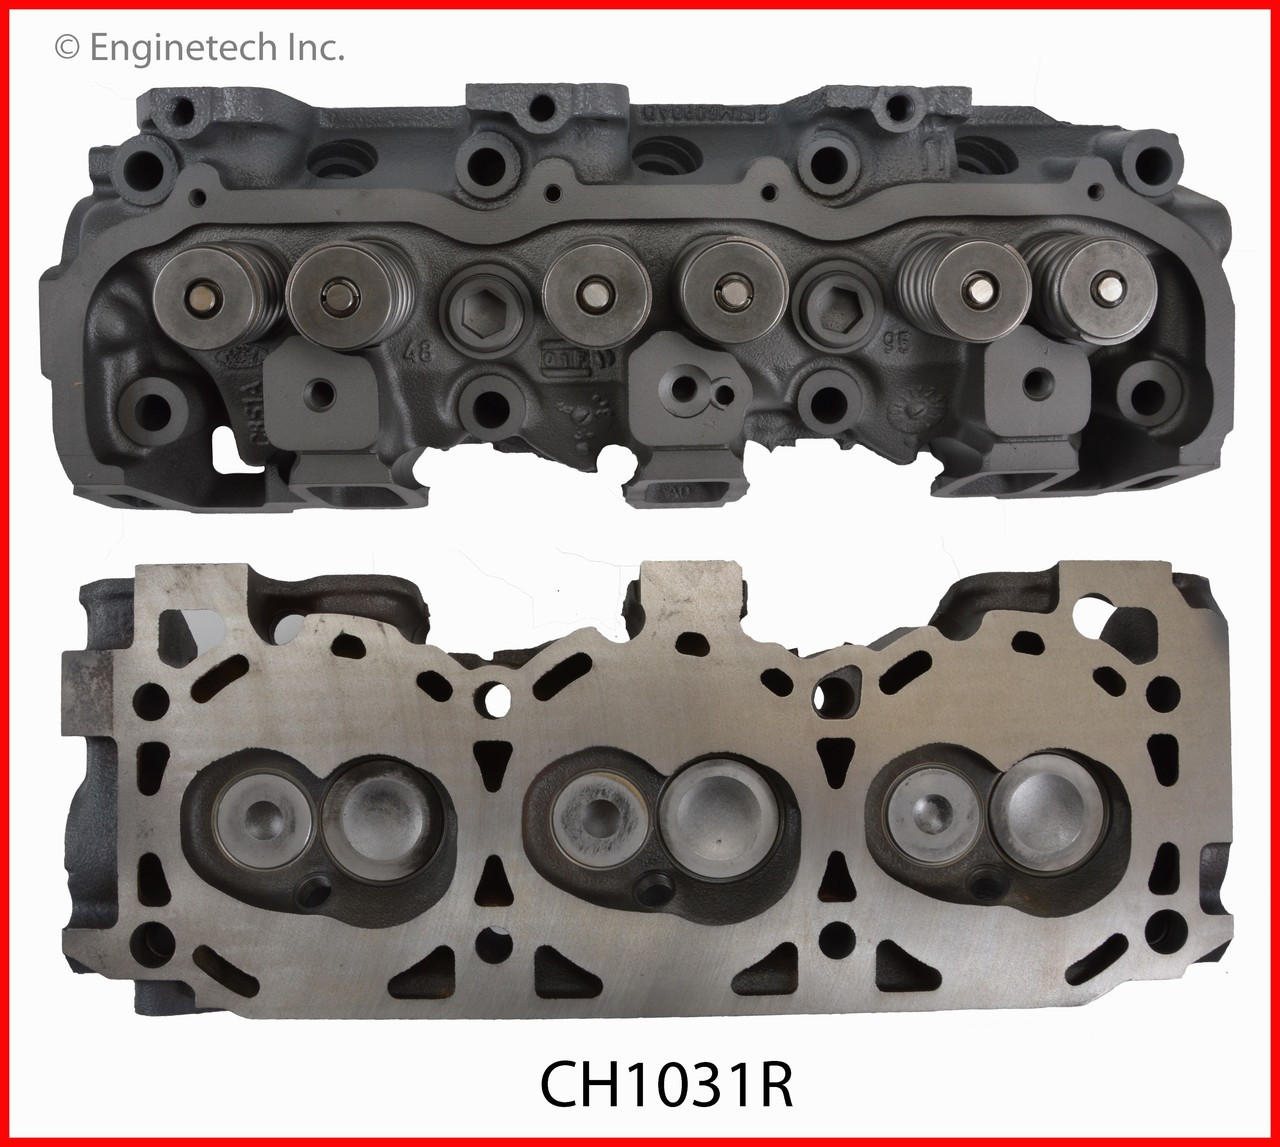 Cylinder Head Assembly - 1996 Ford Ranger 4.0L (CH1031R.A5)